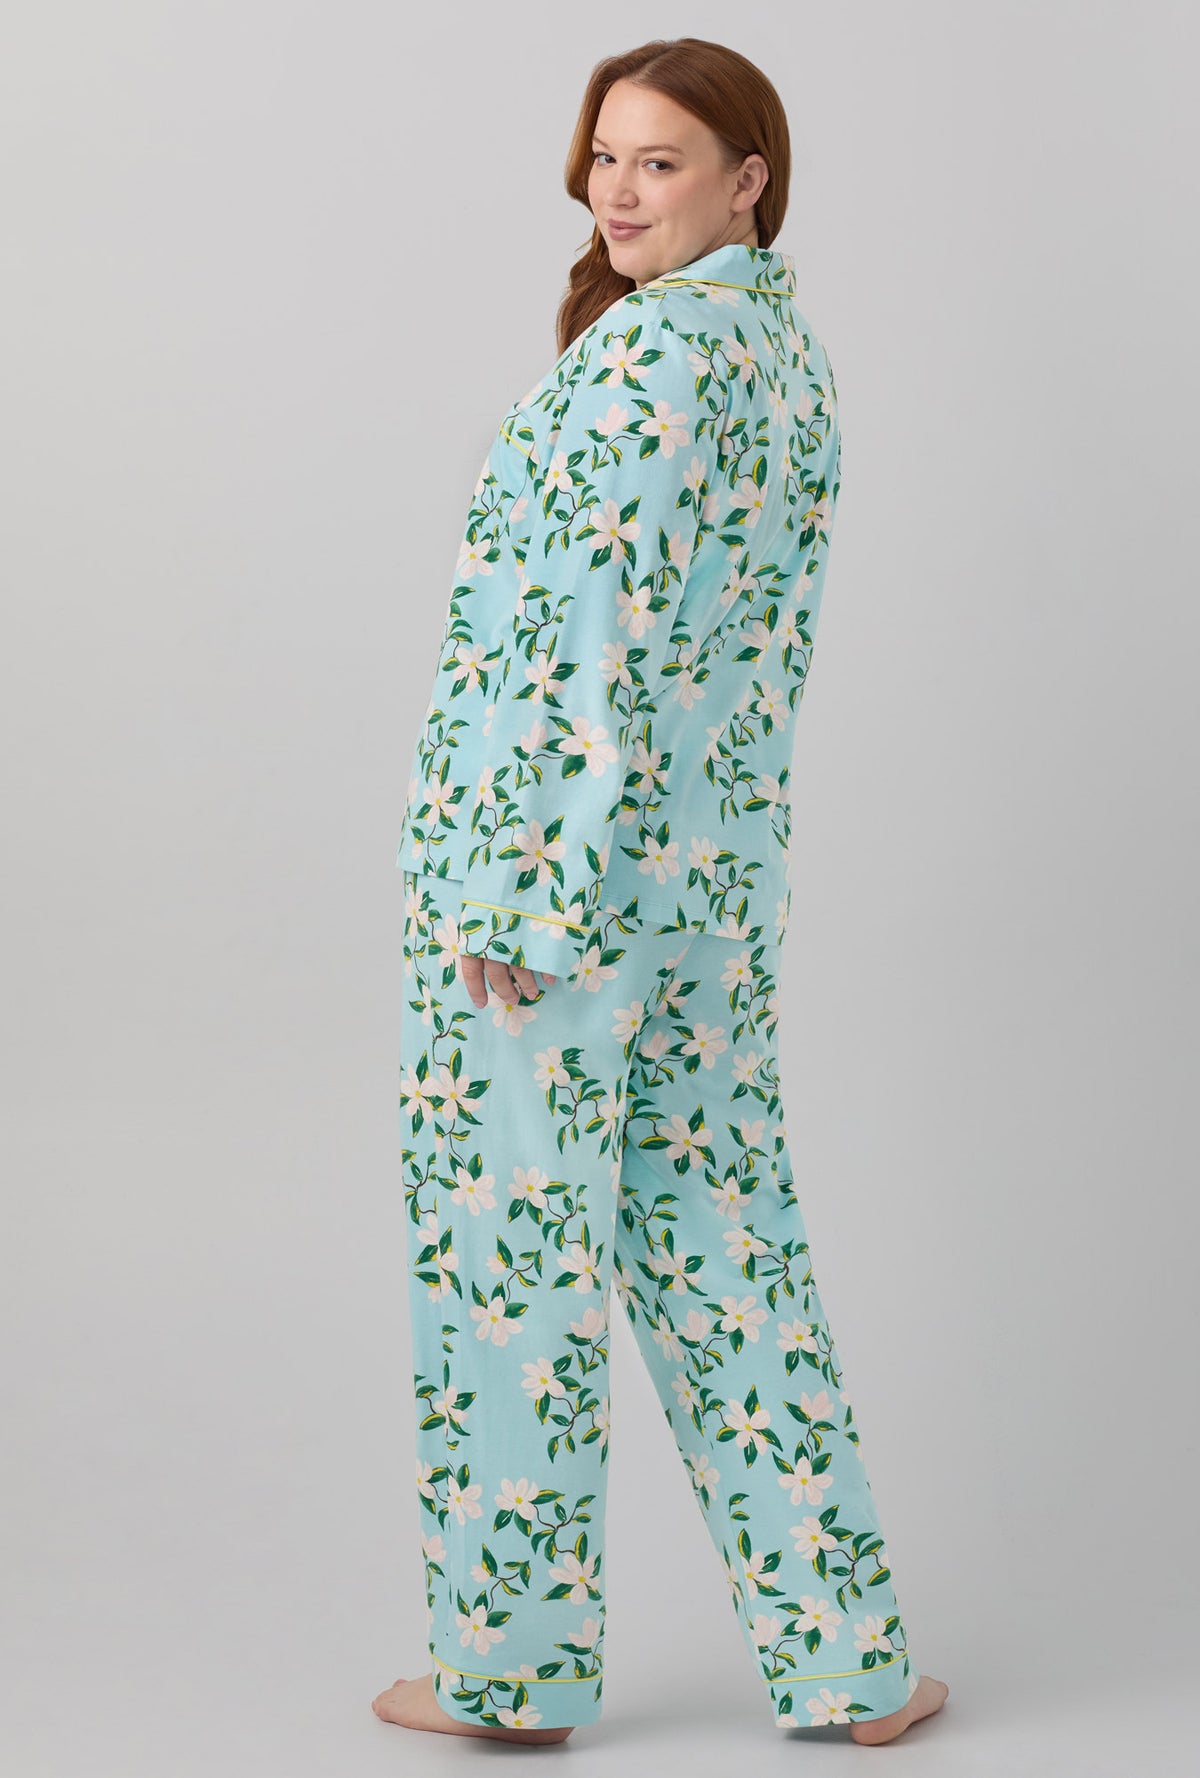 A lady wearing blue long sleeve classic stretch jersey pj set with belle blossoms print